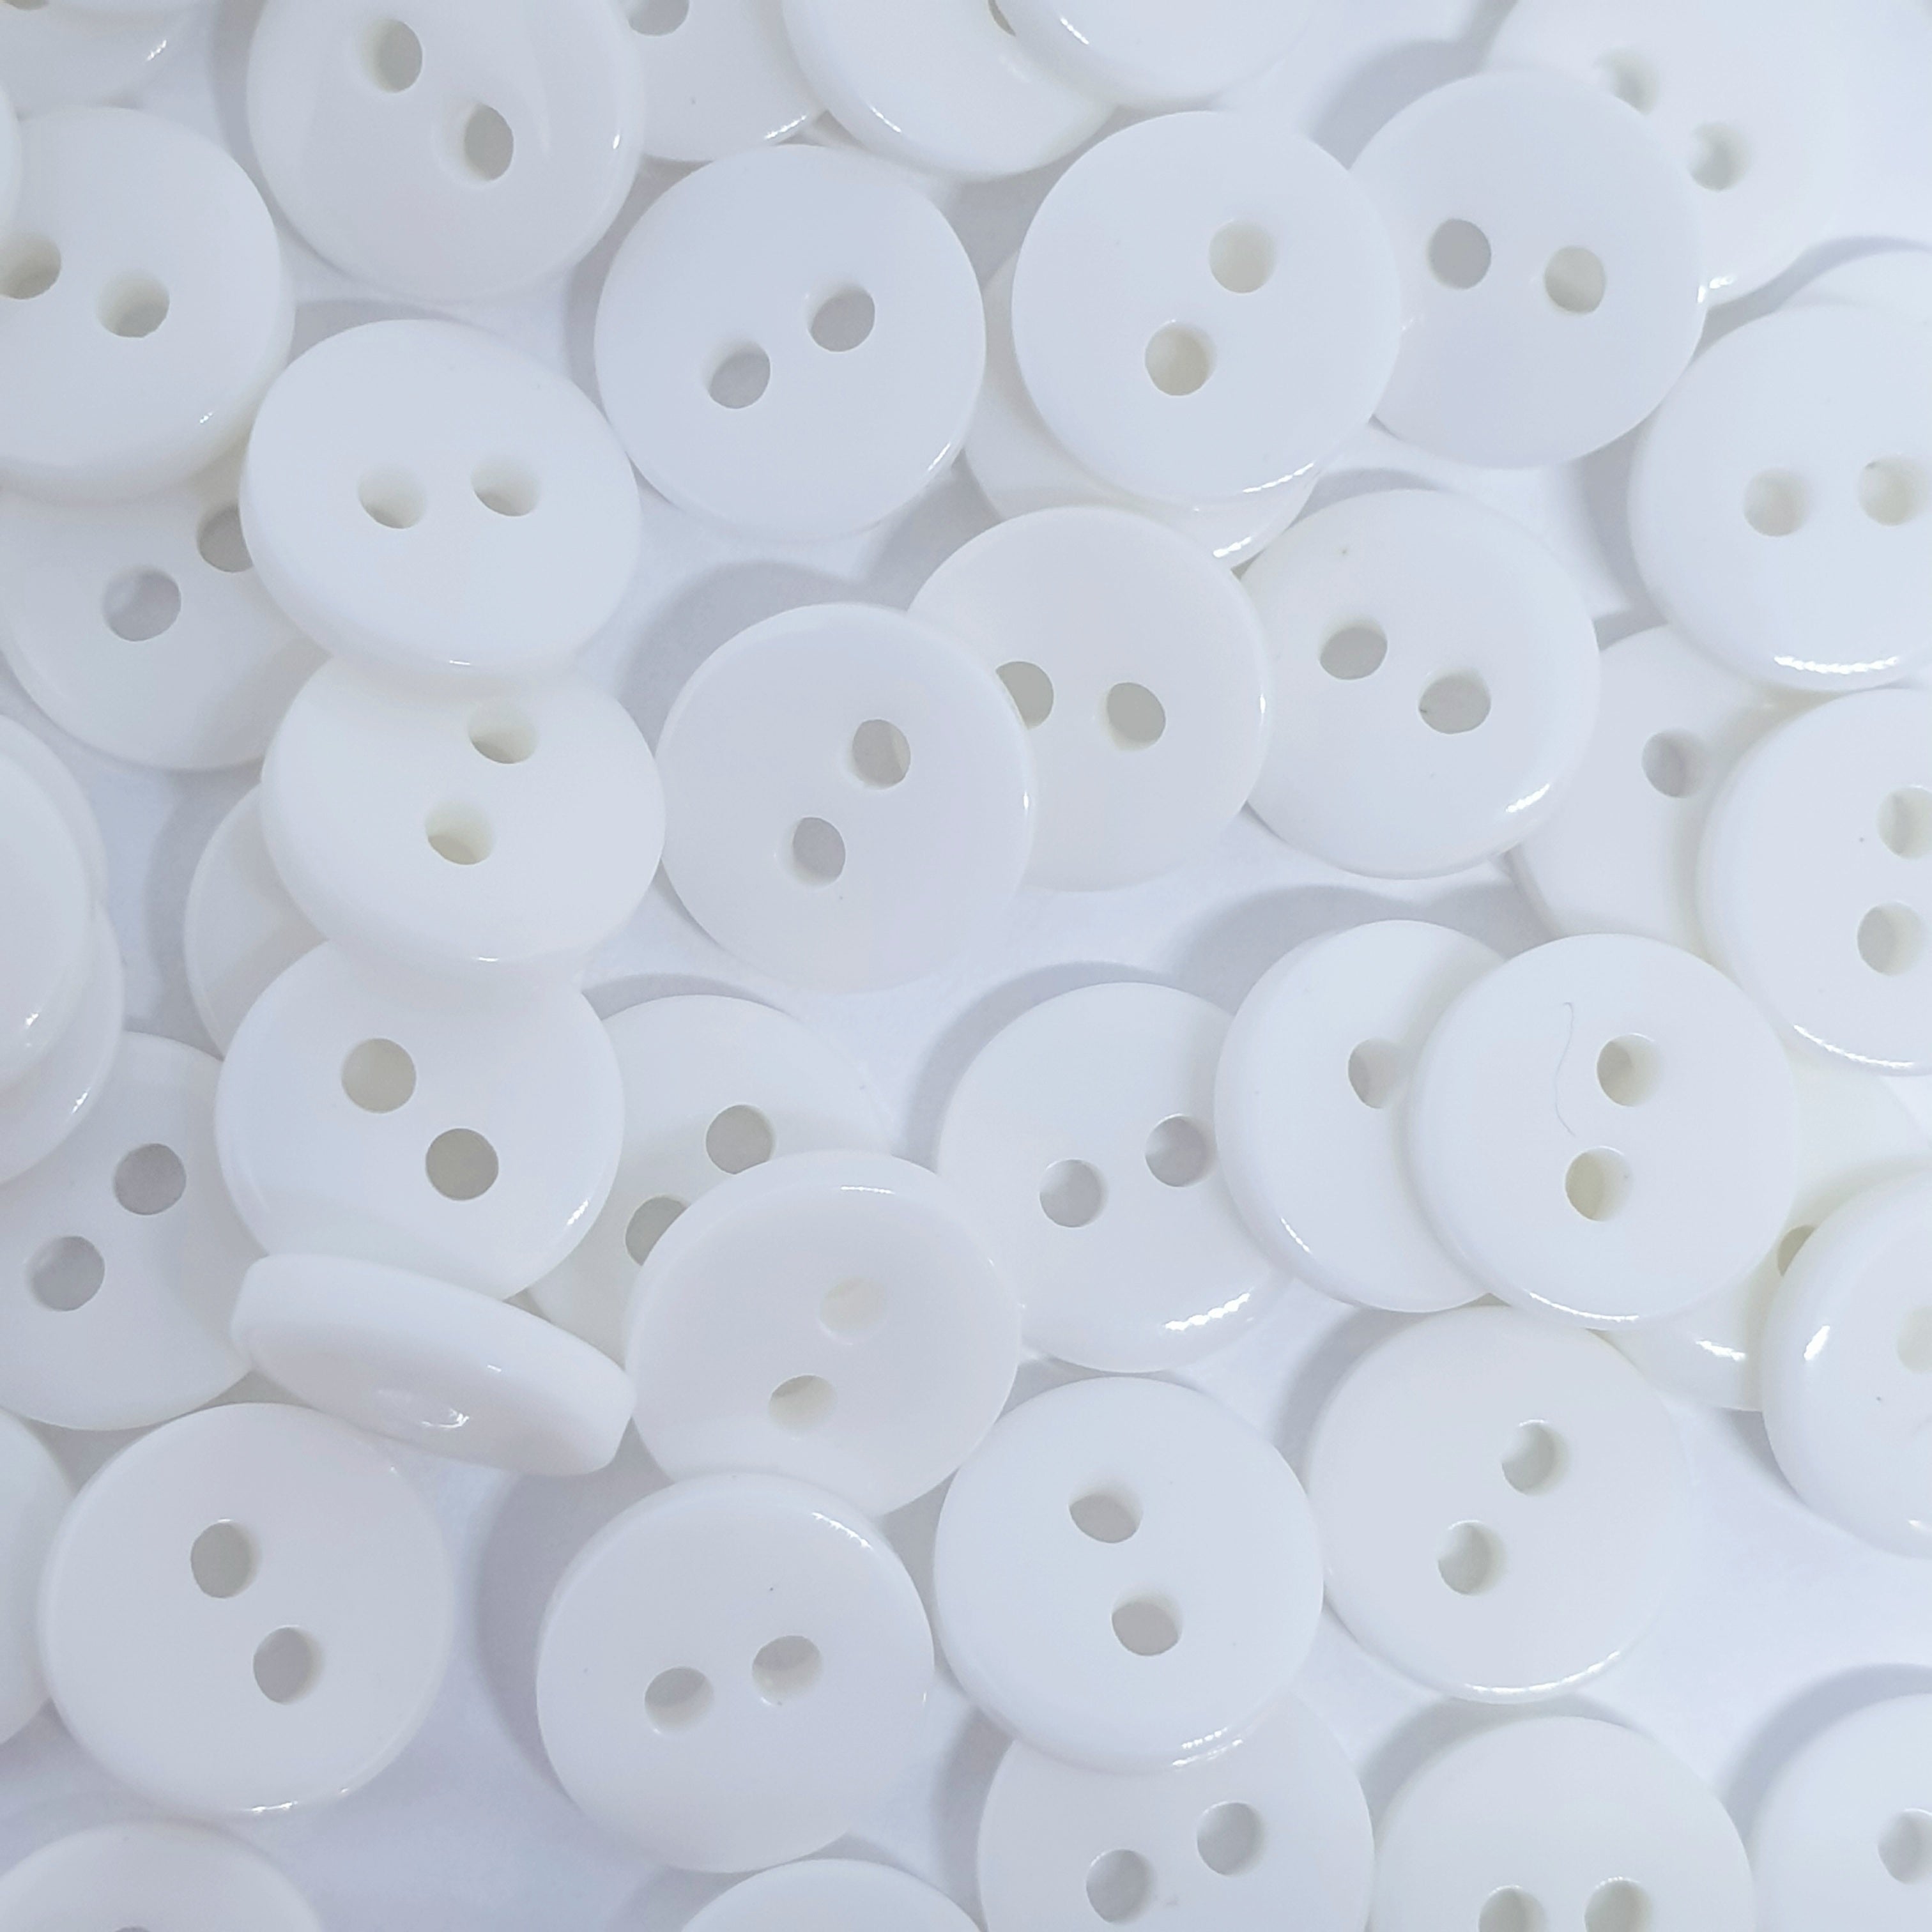 MajorCrafts 120pcs 9mm White 2 Holes Small Round Resin Sewing Buttons